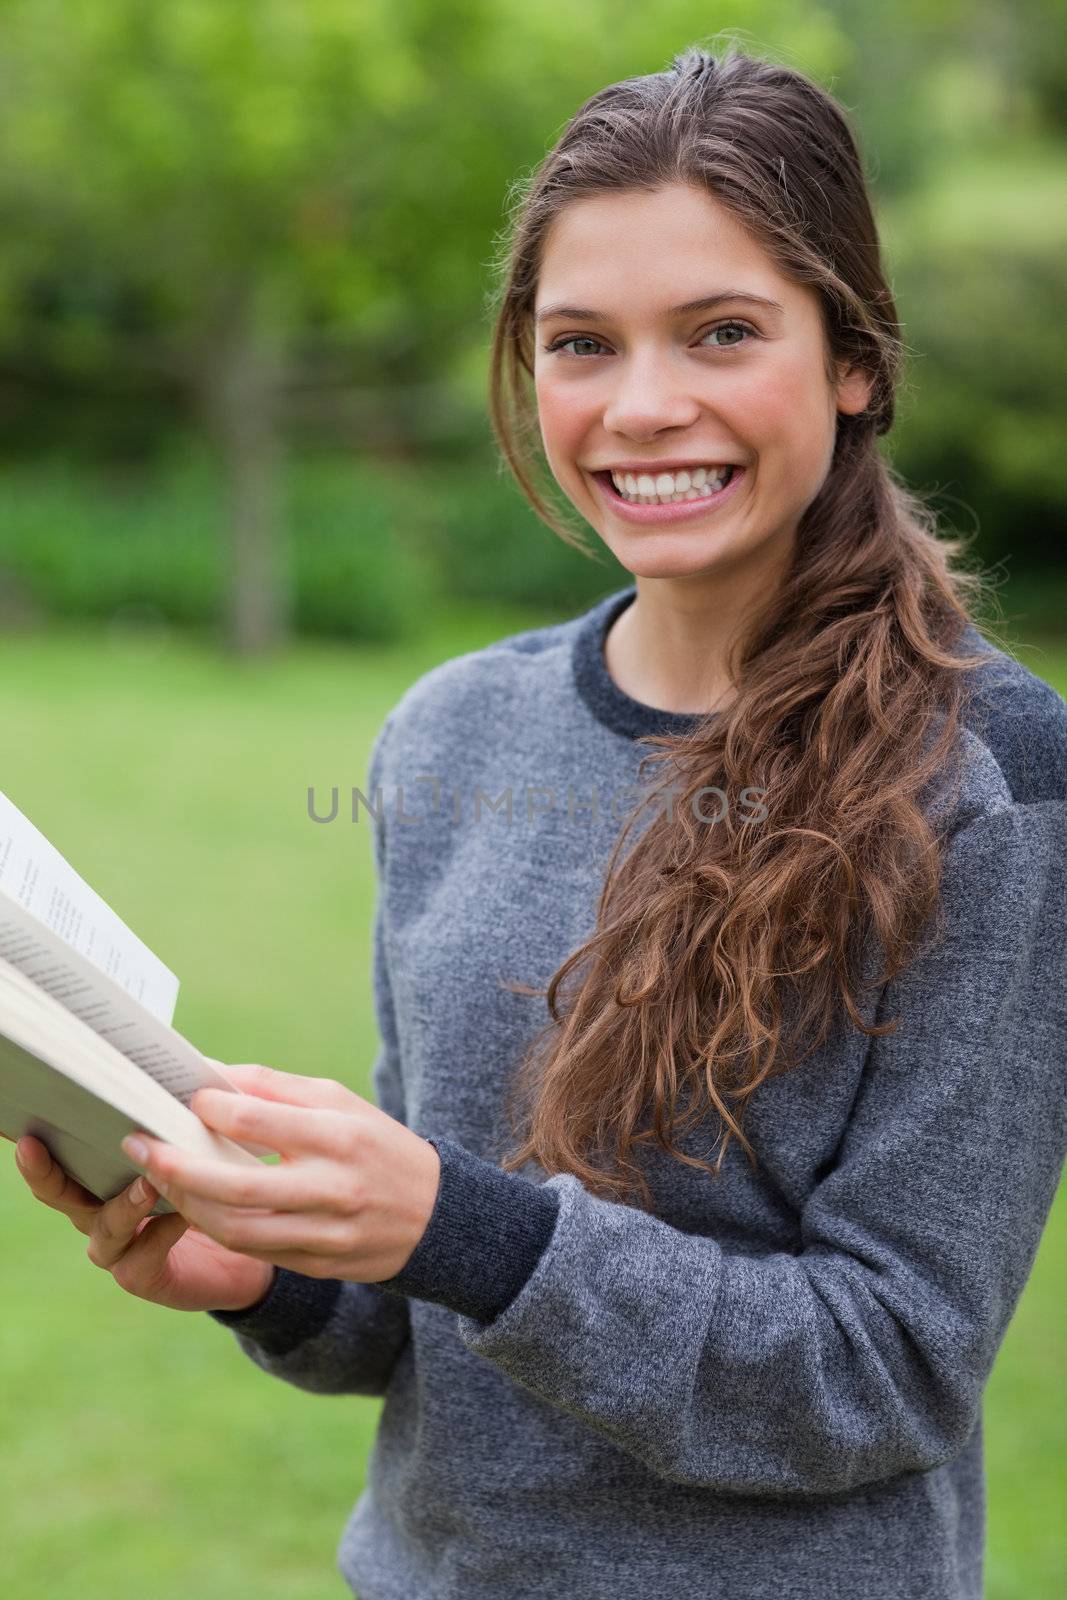 Young smiling girl looking at the camera while reading a book by Wavebreakmedia